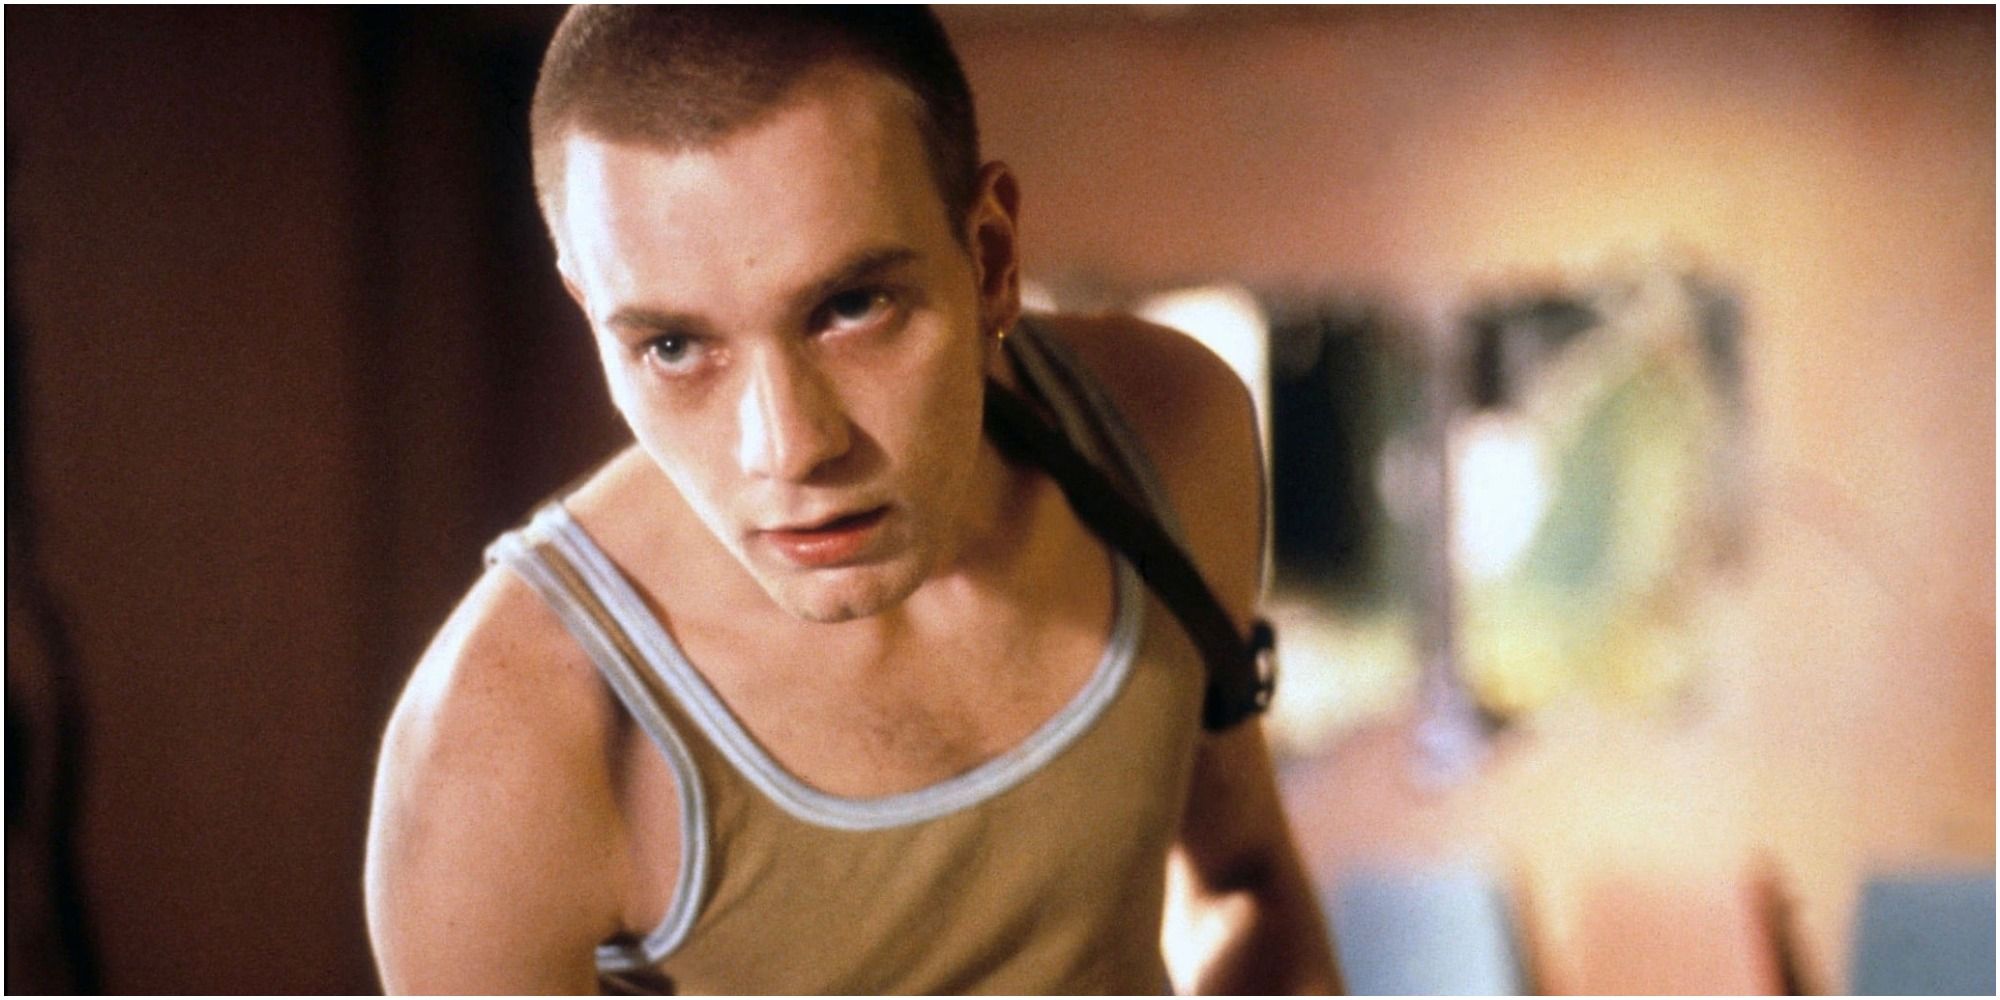 Trainspotting 2 gets an official release date - watch the teaser video